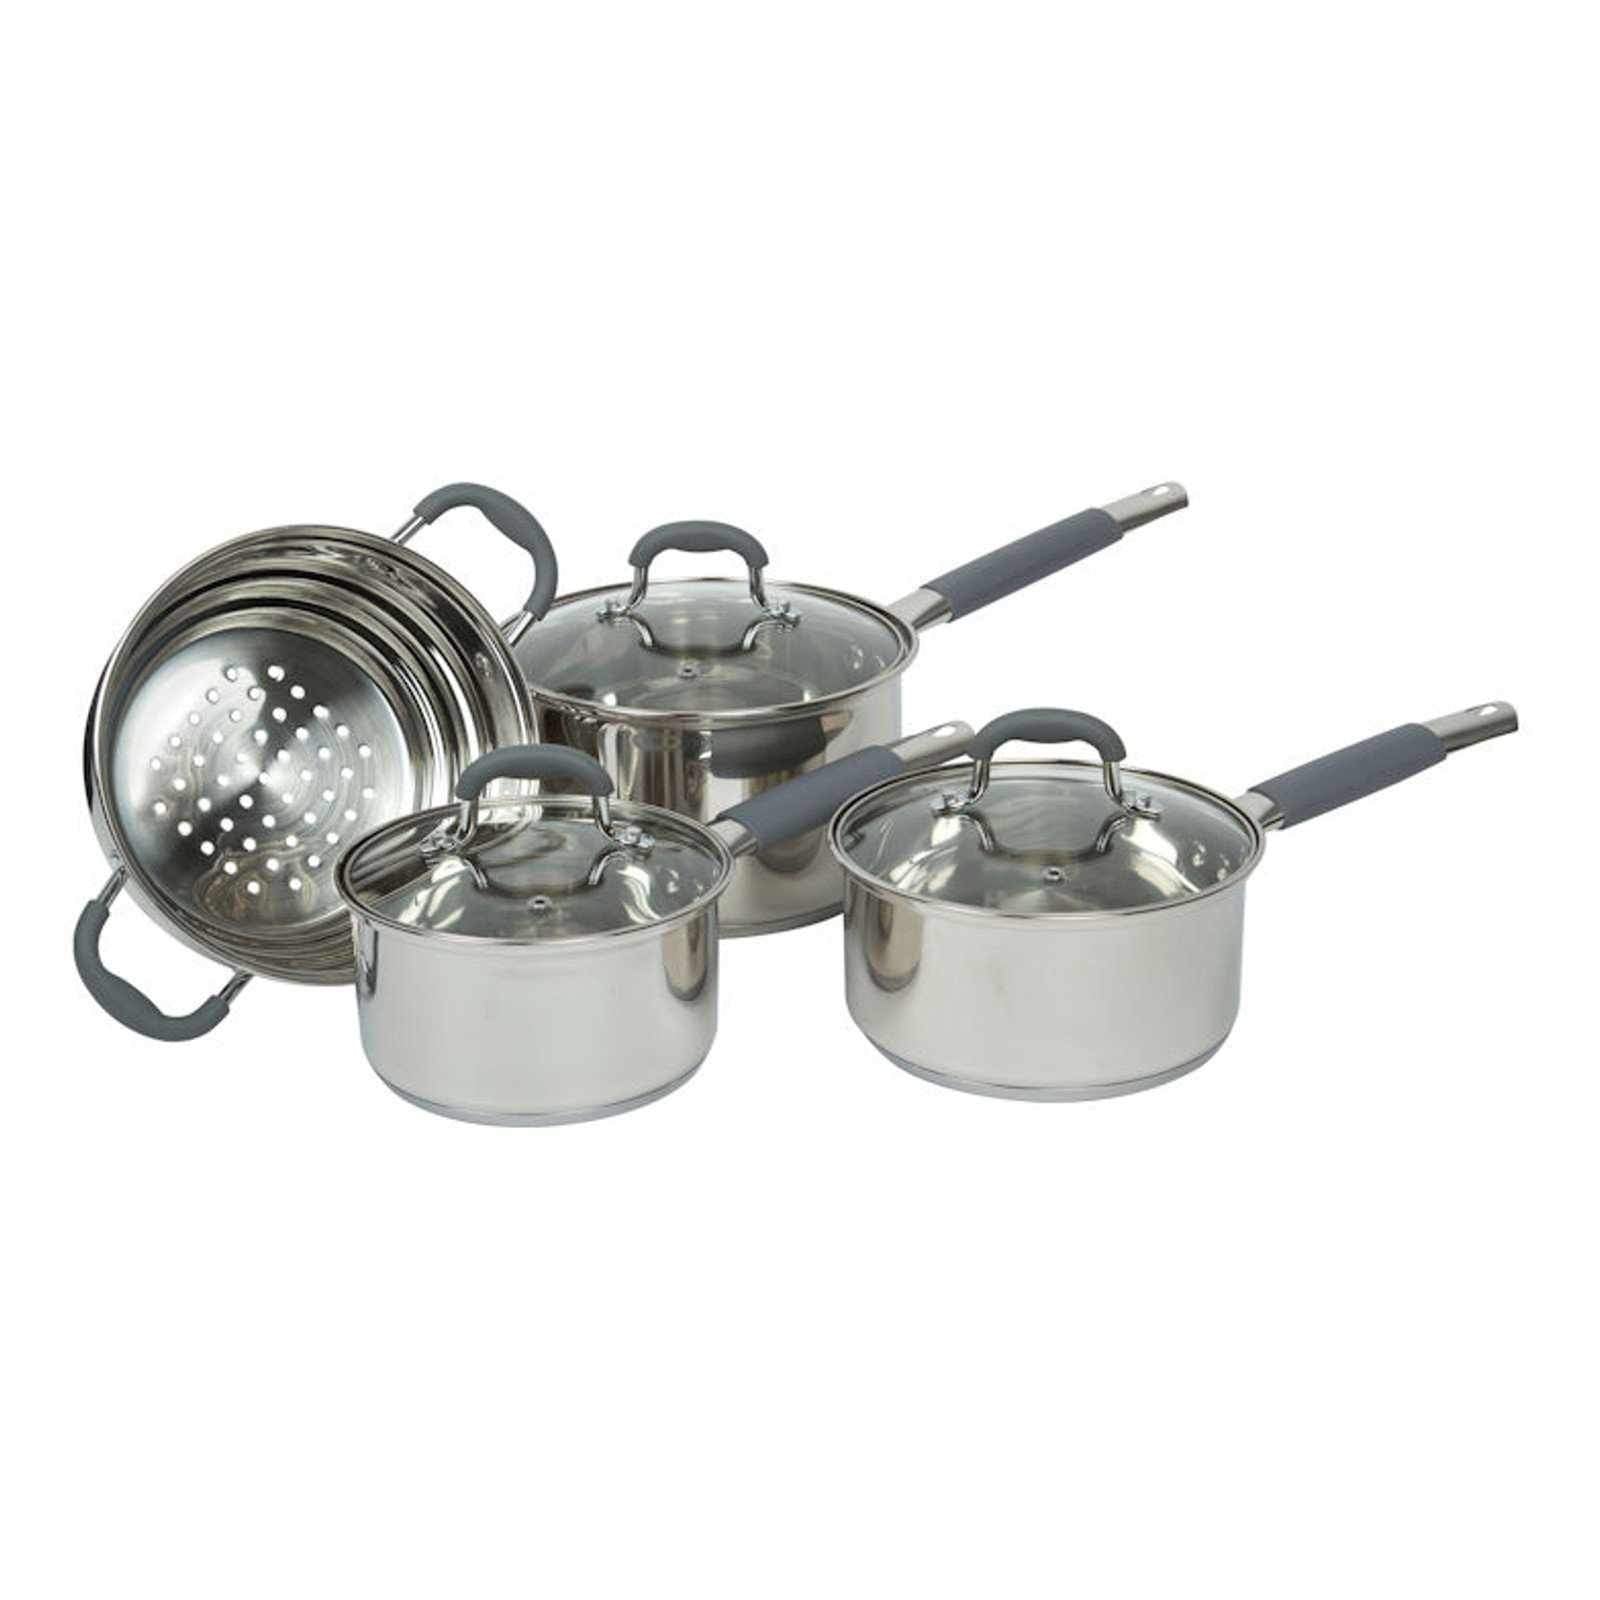 Davis & Waddell 4pcs Argon Cookware set Stainless Steel with Glass Lids-Stainless Steel Cookware Set-Chef's Quality Cookware